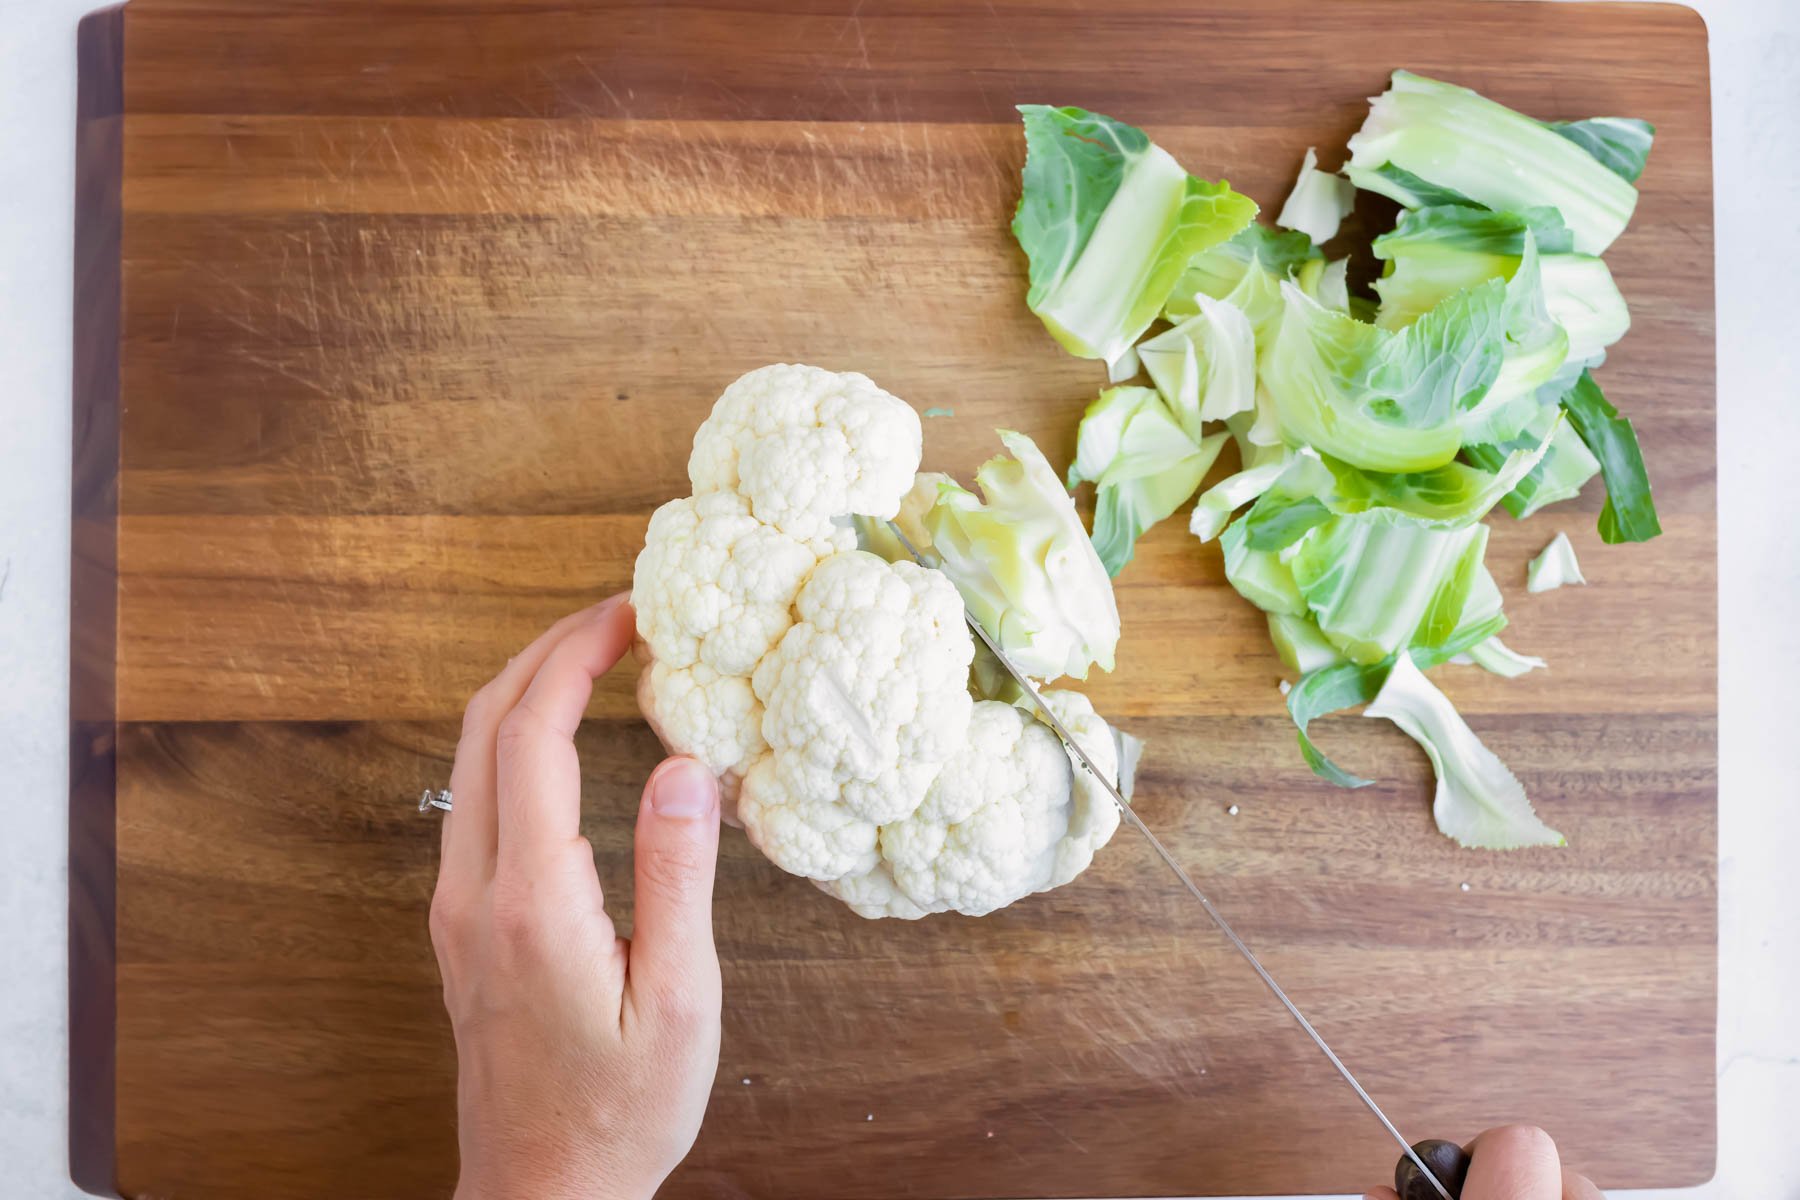 The stem and leaves are taken off of the cauliflower before being baked in the oven.